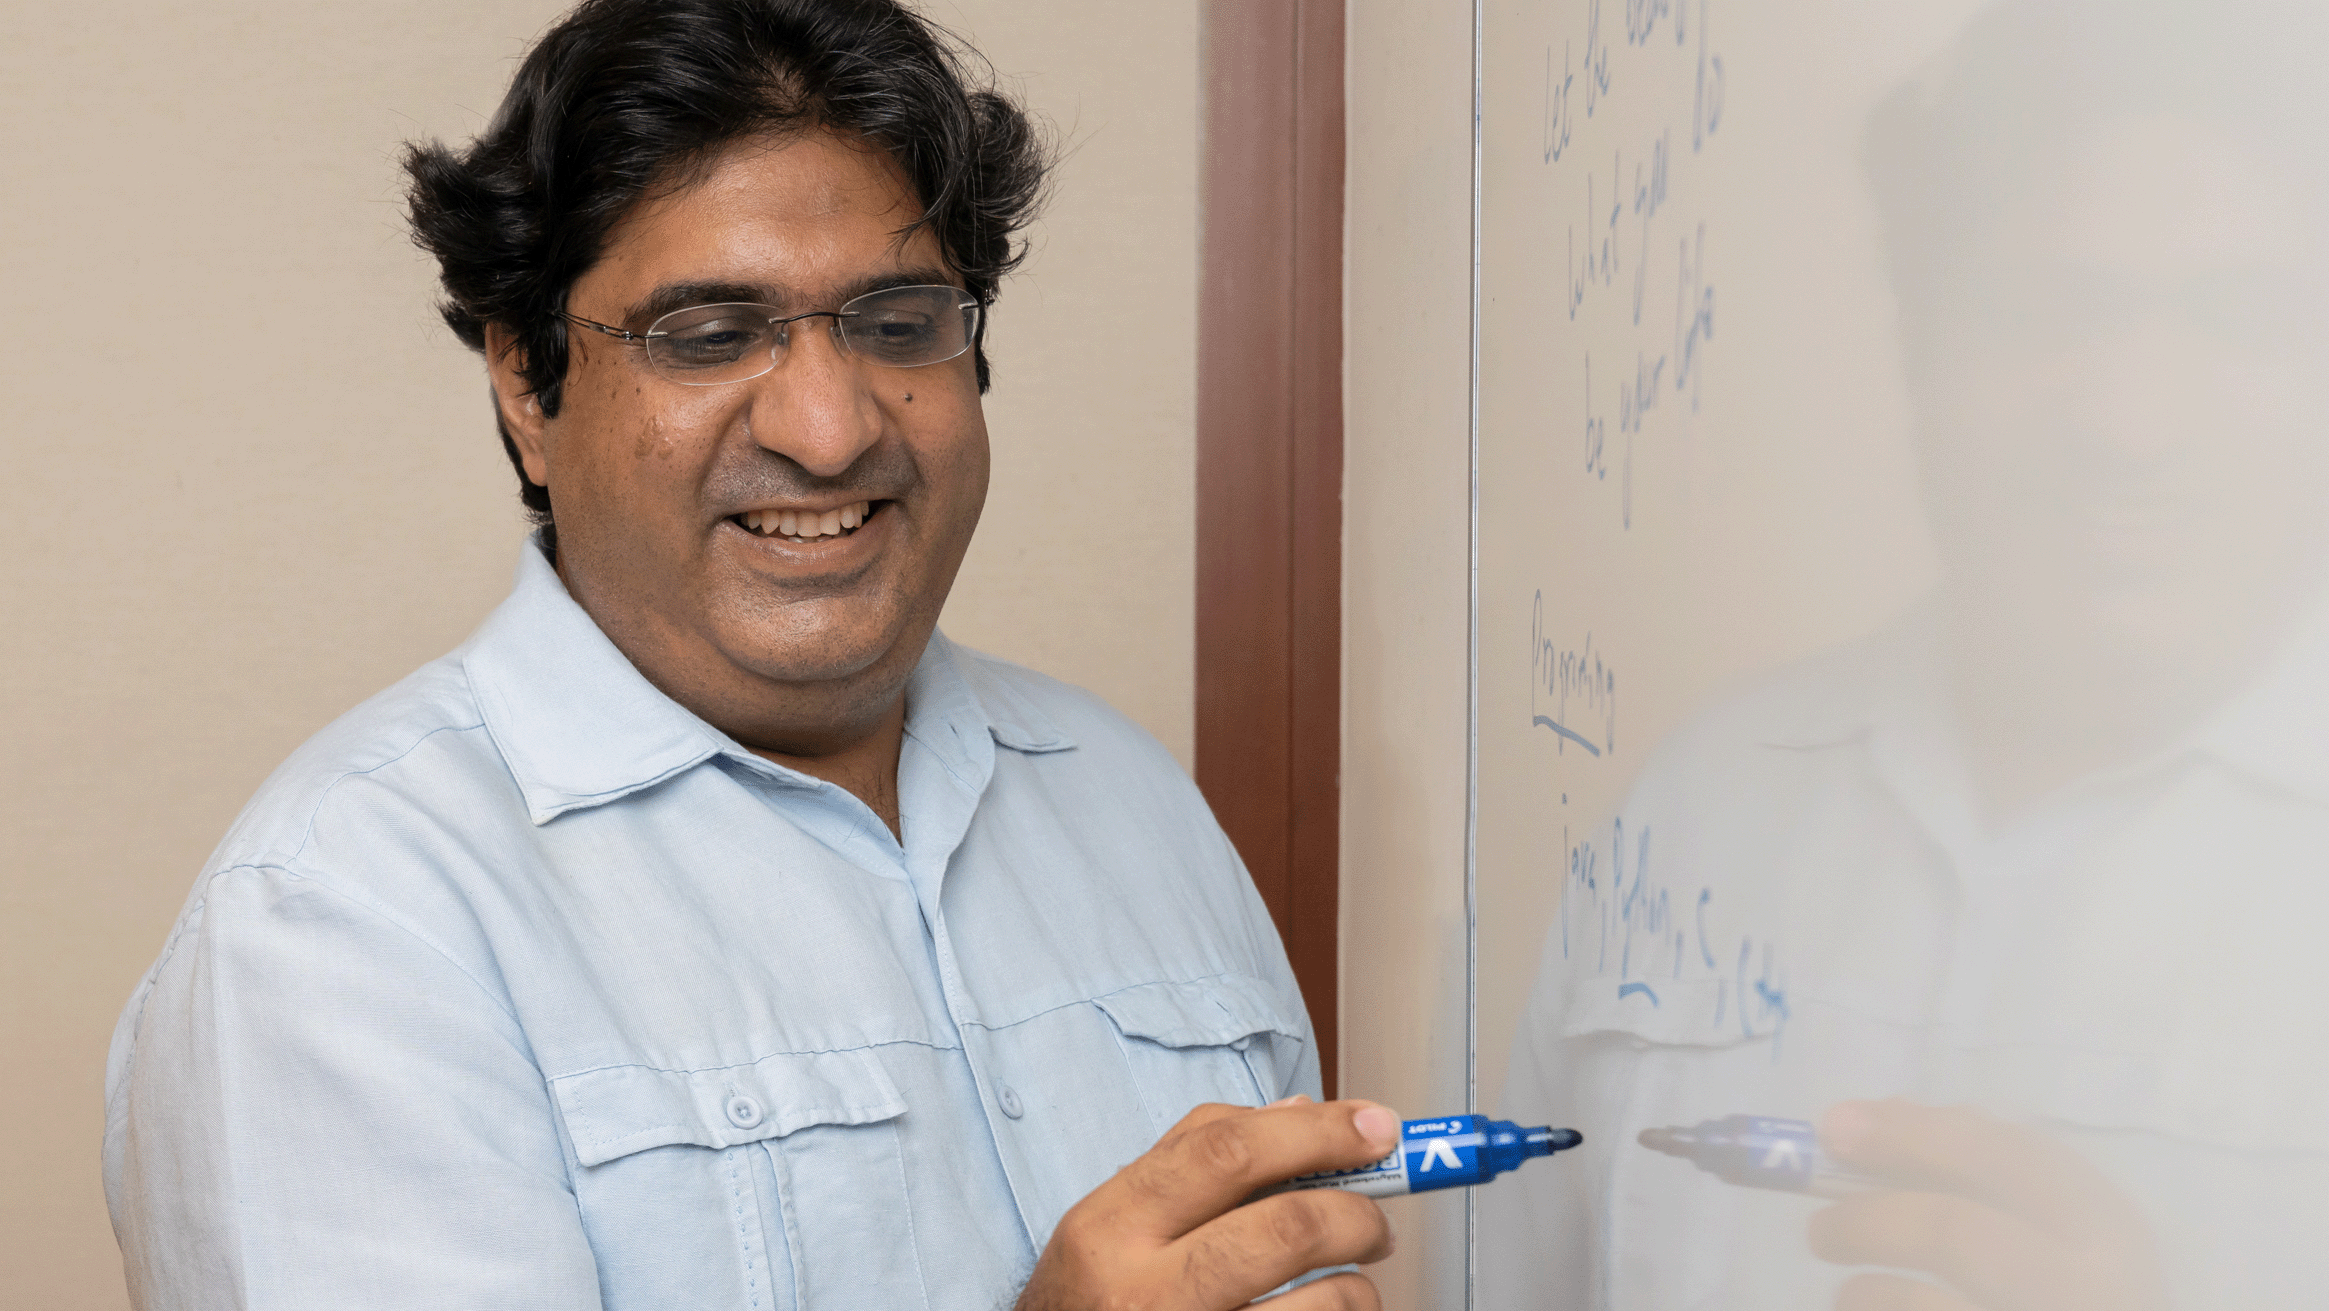 Associate Professor Shaffique Adam of the Dept of Materials Science and Engineering led the NUS component of the study